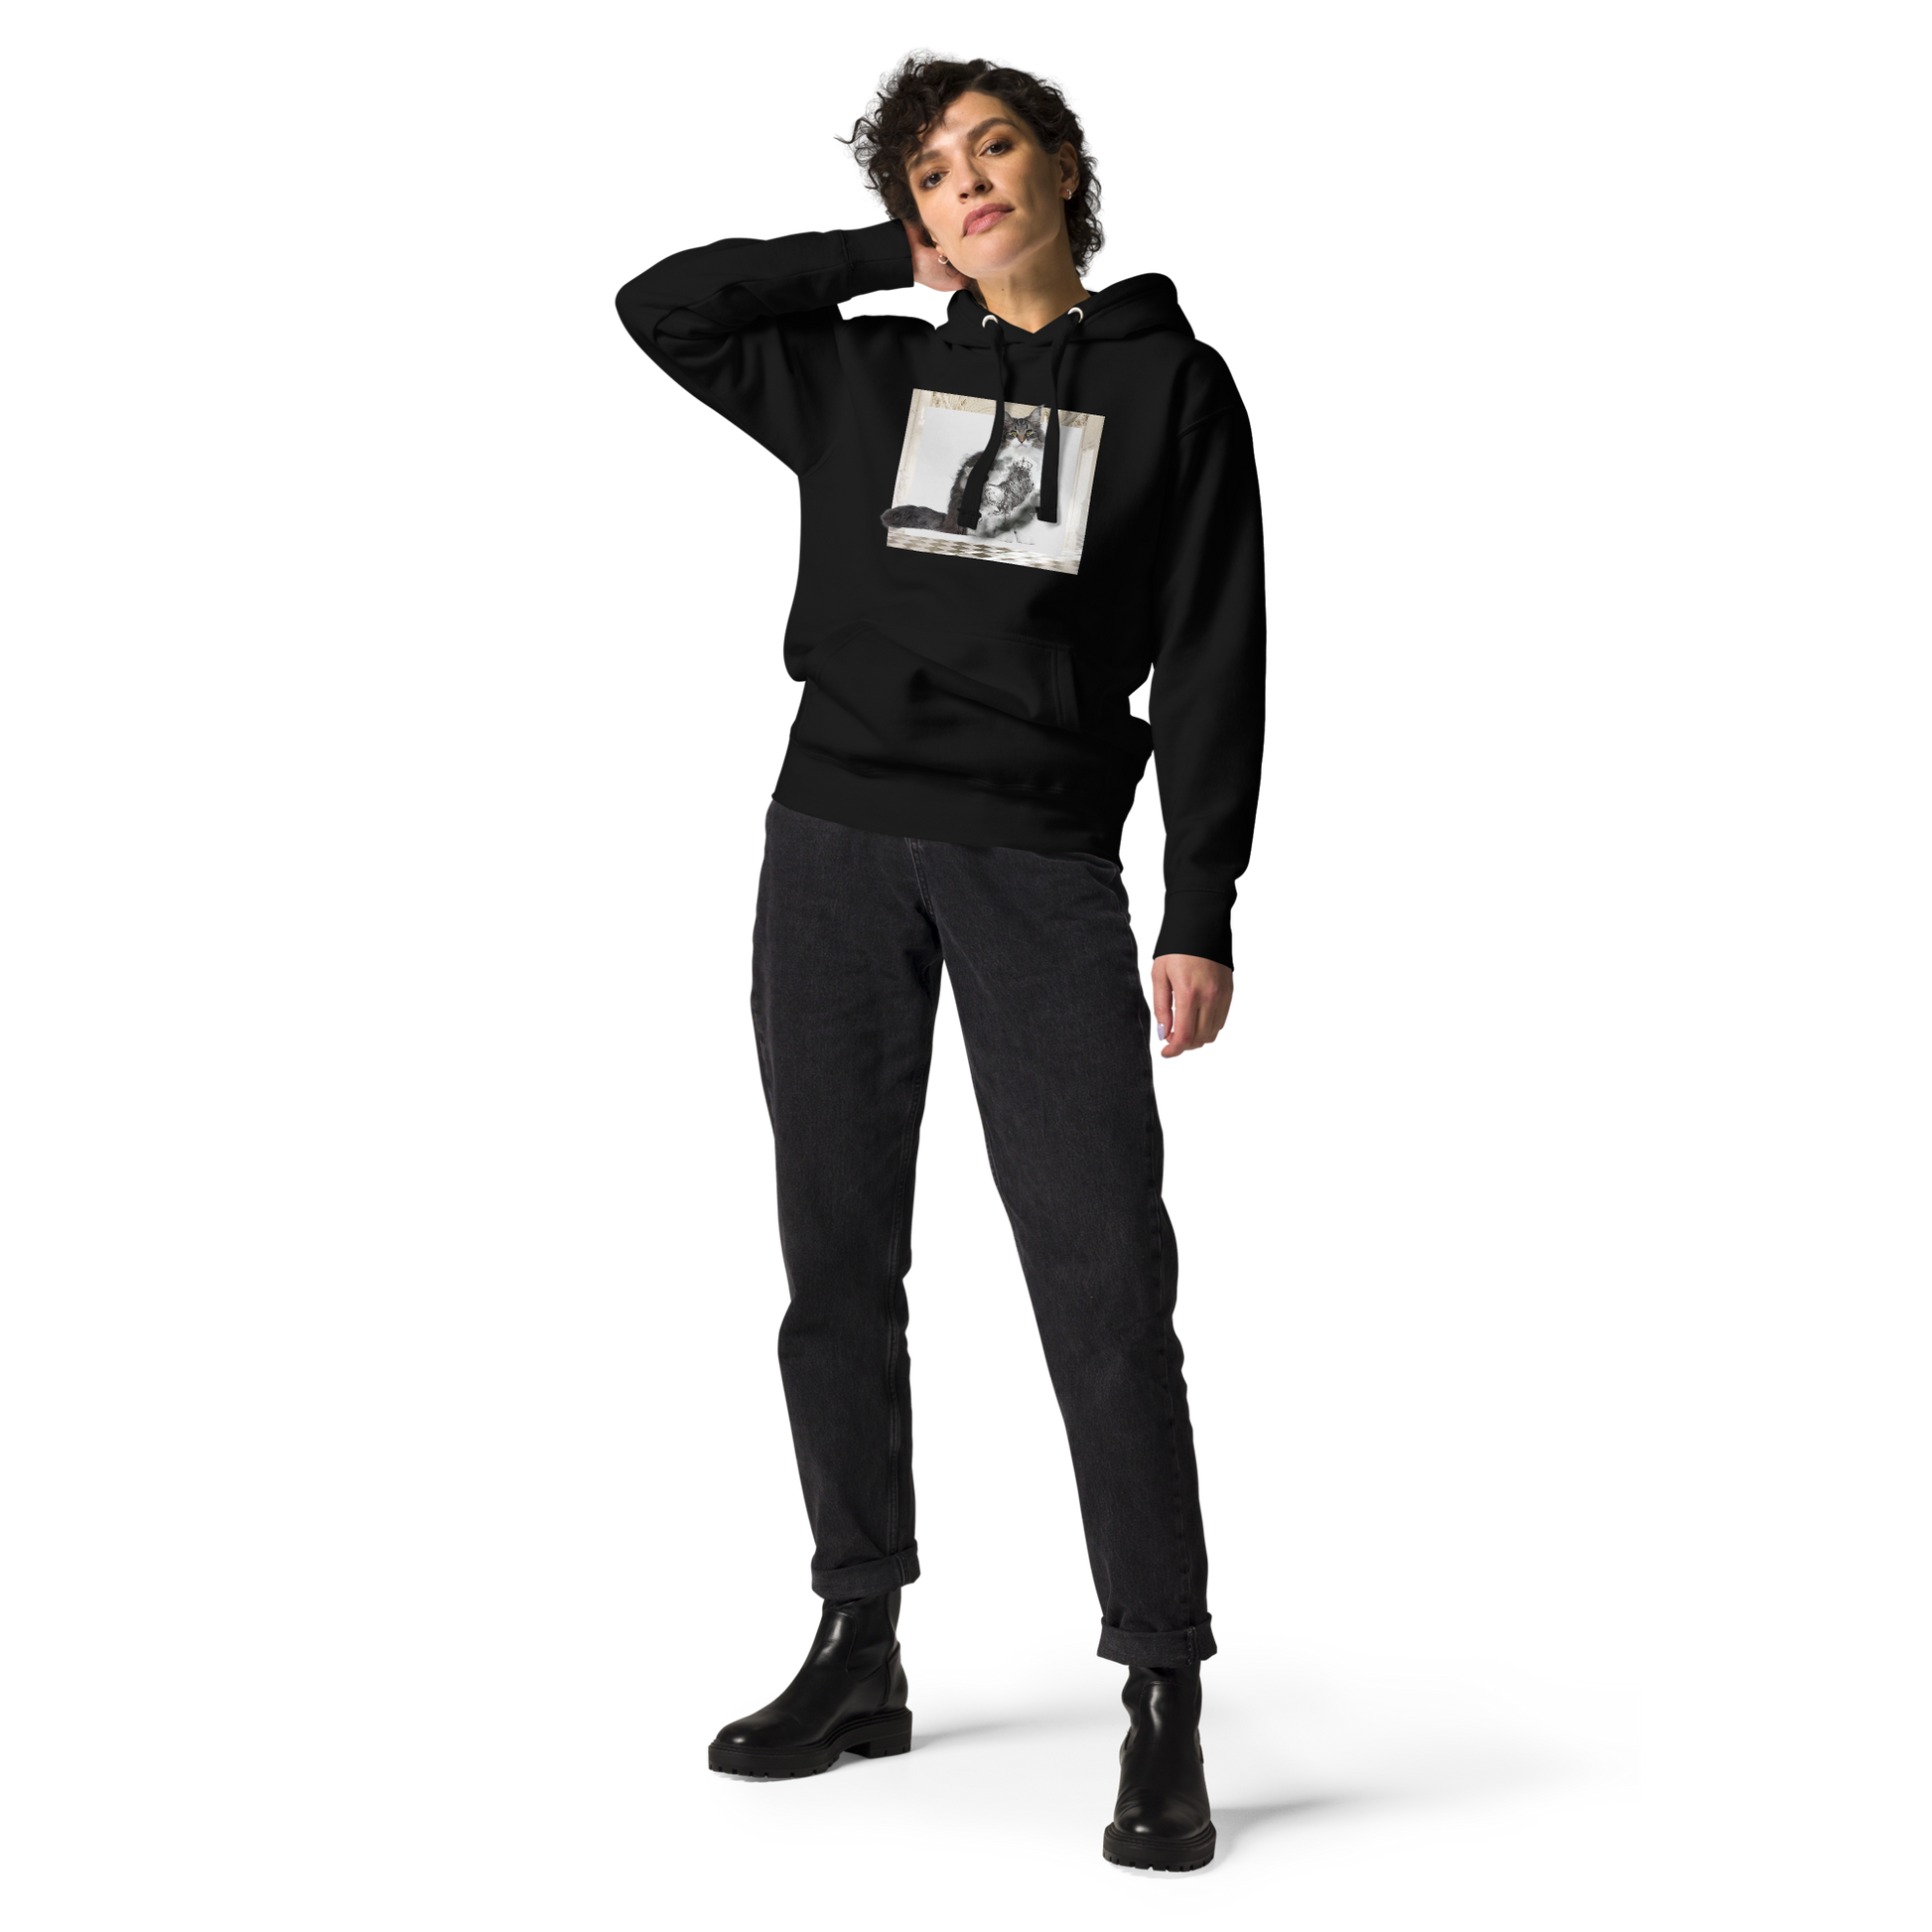 Woman wearing a Black Premium Cat Hoodie featuring a majestic Royal Cat graphic on the chest - Cool Graphic Cat Hoodies - Boozy Fox